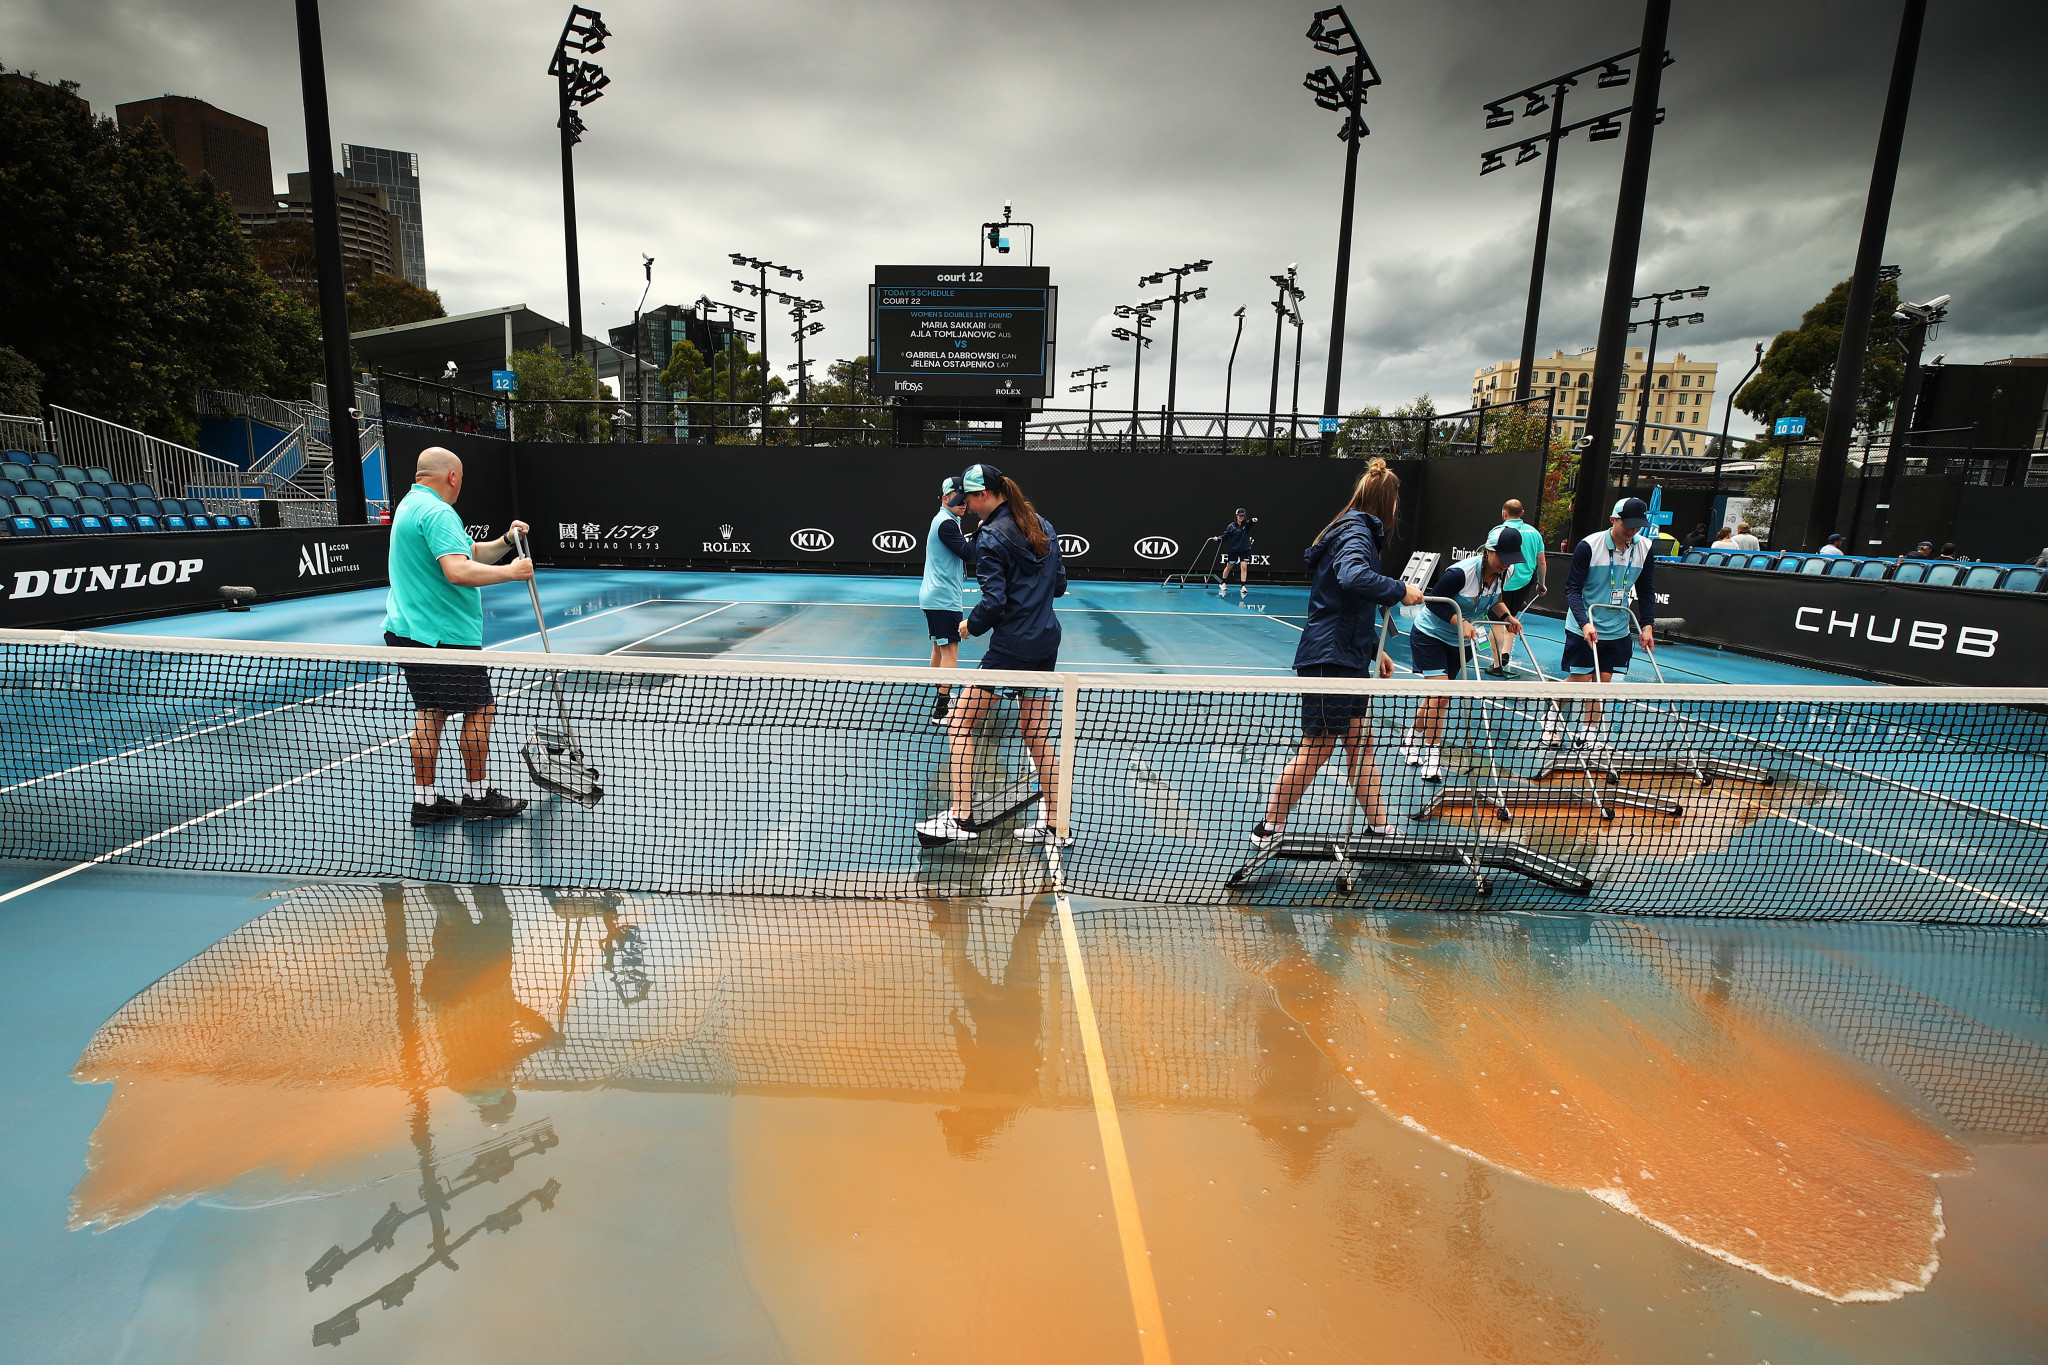 Dusty rain delays play at Australian Open, as courts deep-cleaned